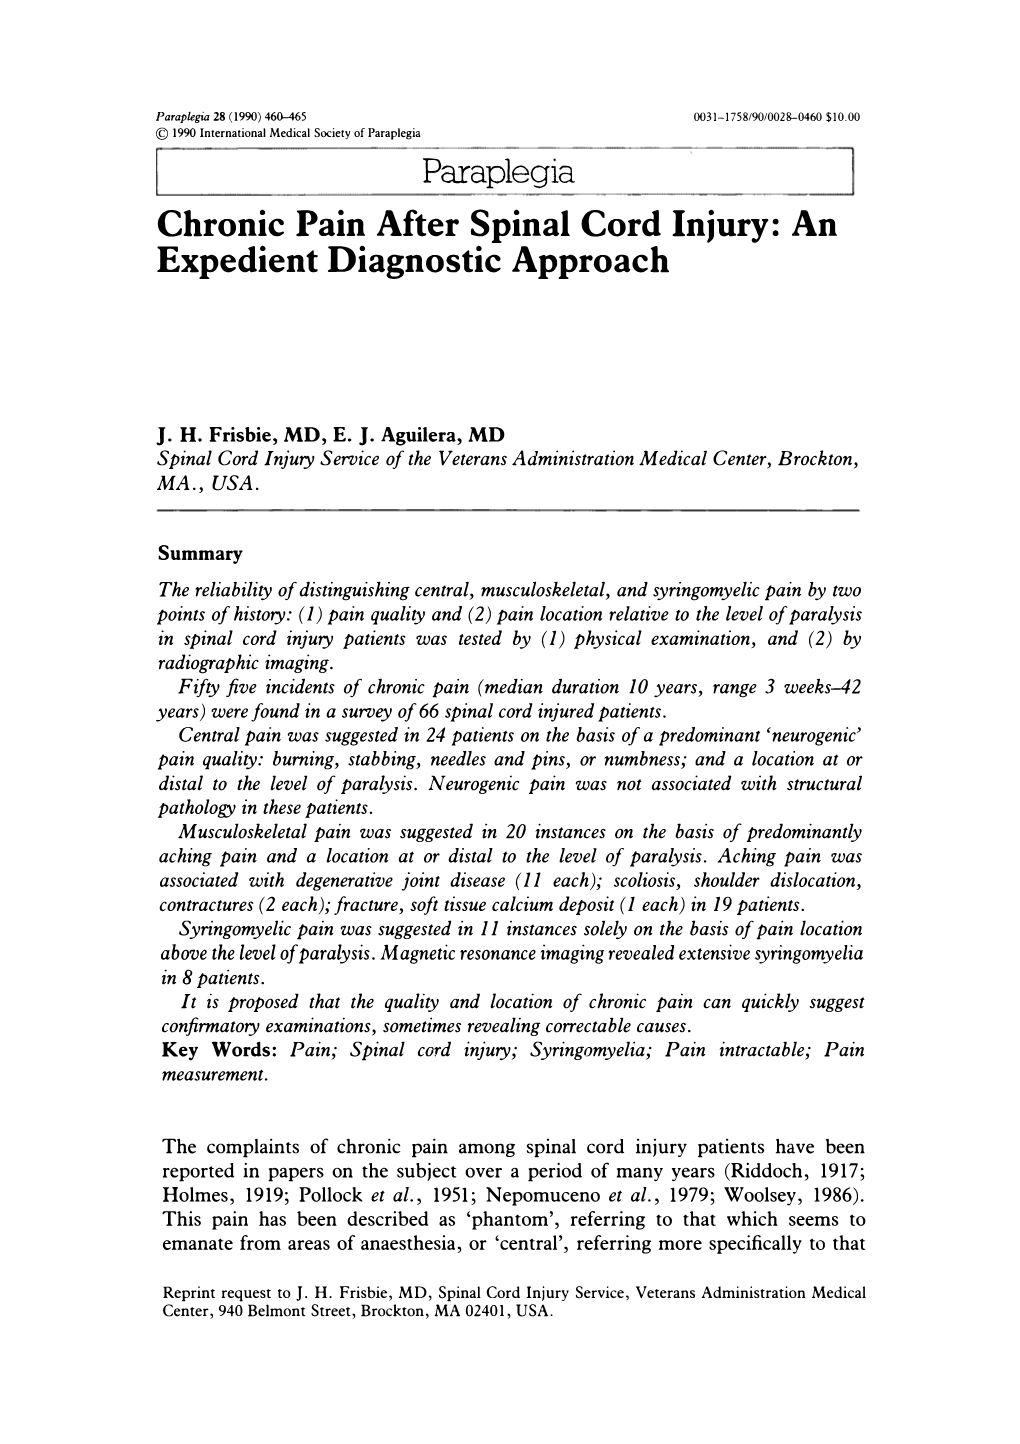 Chronic Pain After Spinal Cord Injury: an Expedient Diagnostic Approach